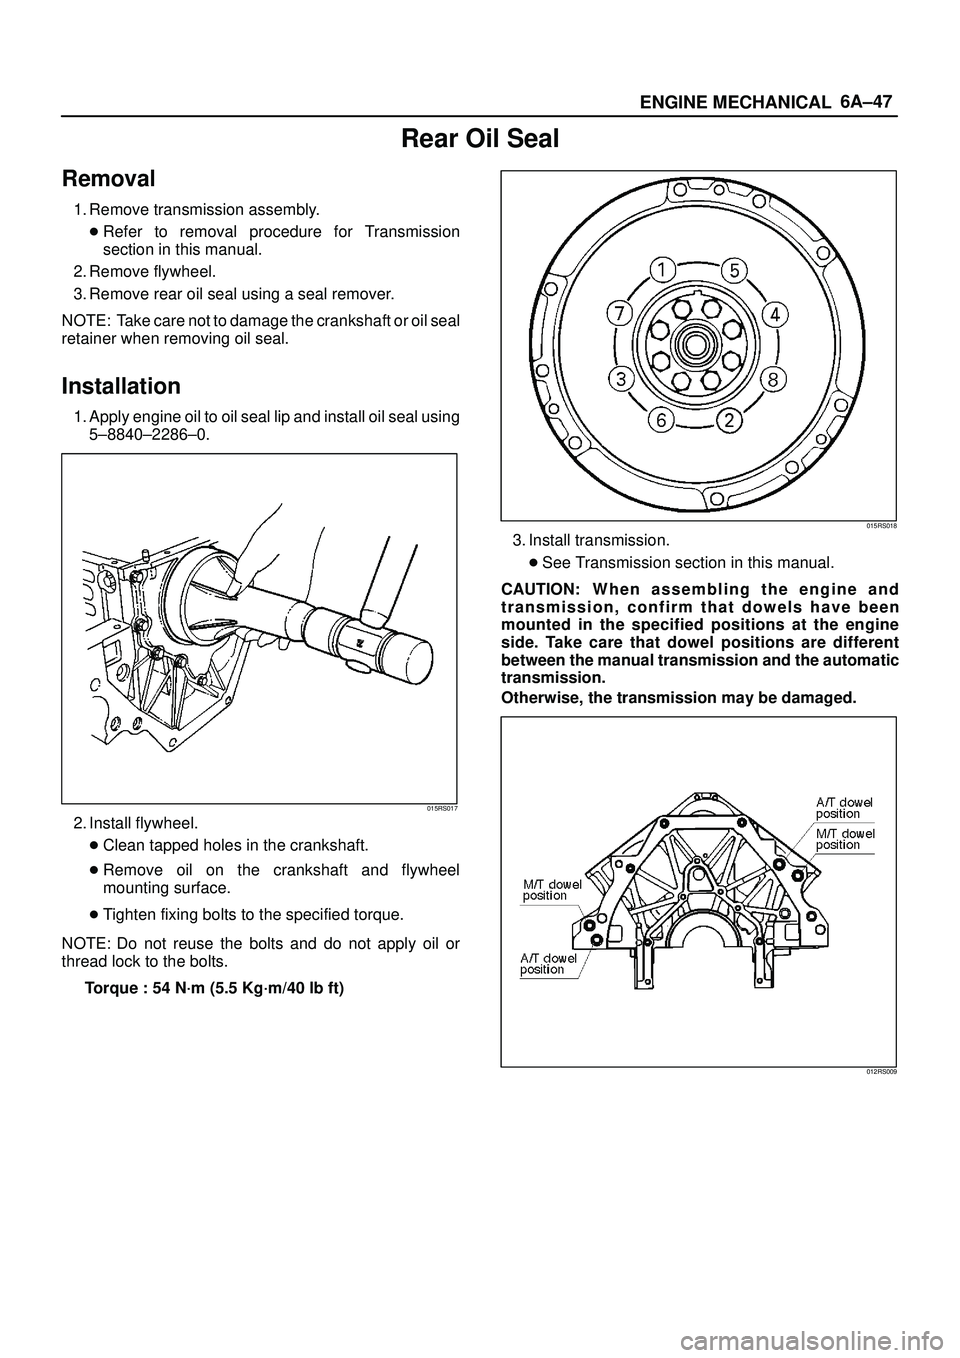 ISUZU TROOPER 1998  Service Owners Guide 6A±47
ENGINE MECHANICAL
Rear Oil Seal
Removal
1. Remove transmission assembly.
Refer to removal procedure for Transmission
section in this manual.
2. Remove flywheel.
3. Remove rear oil seal using a